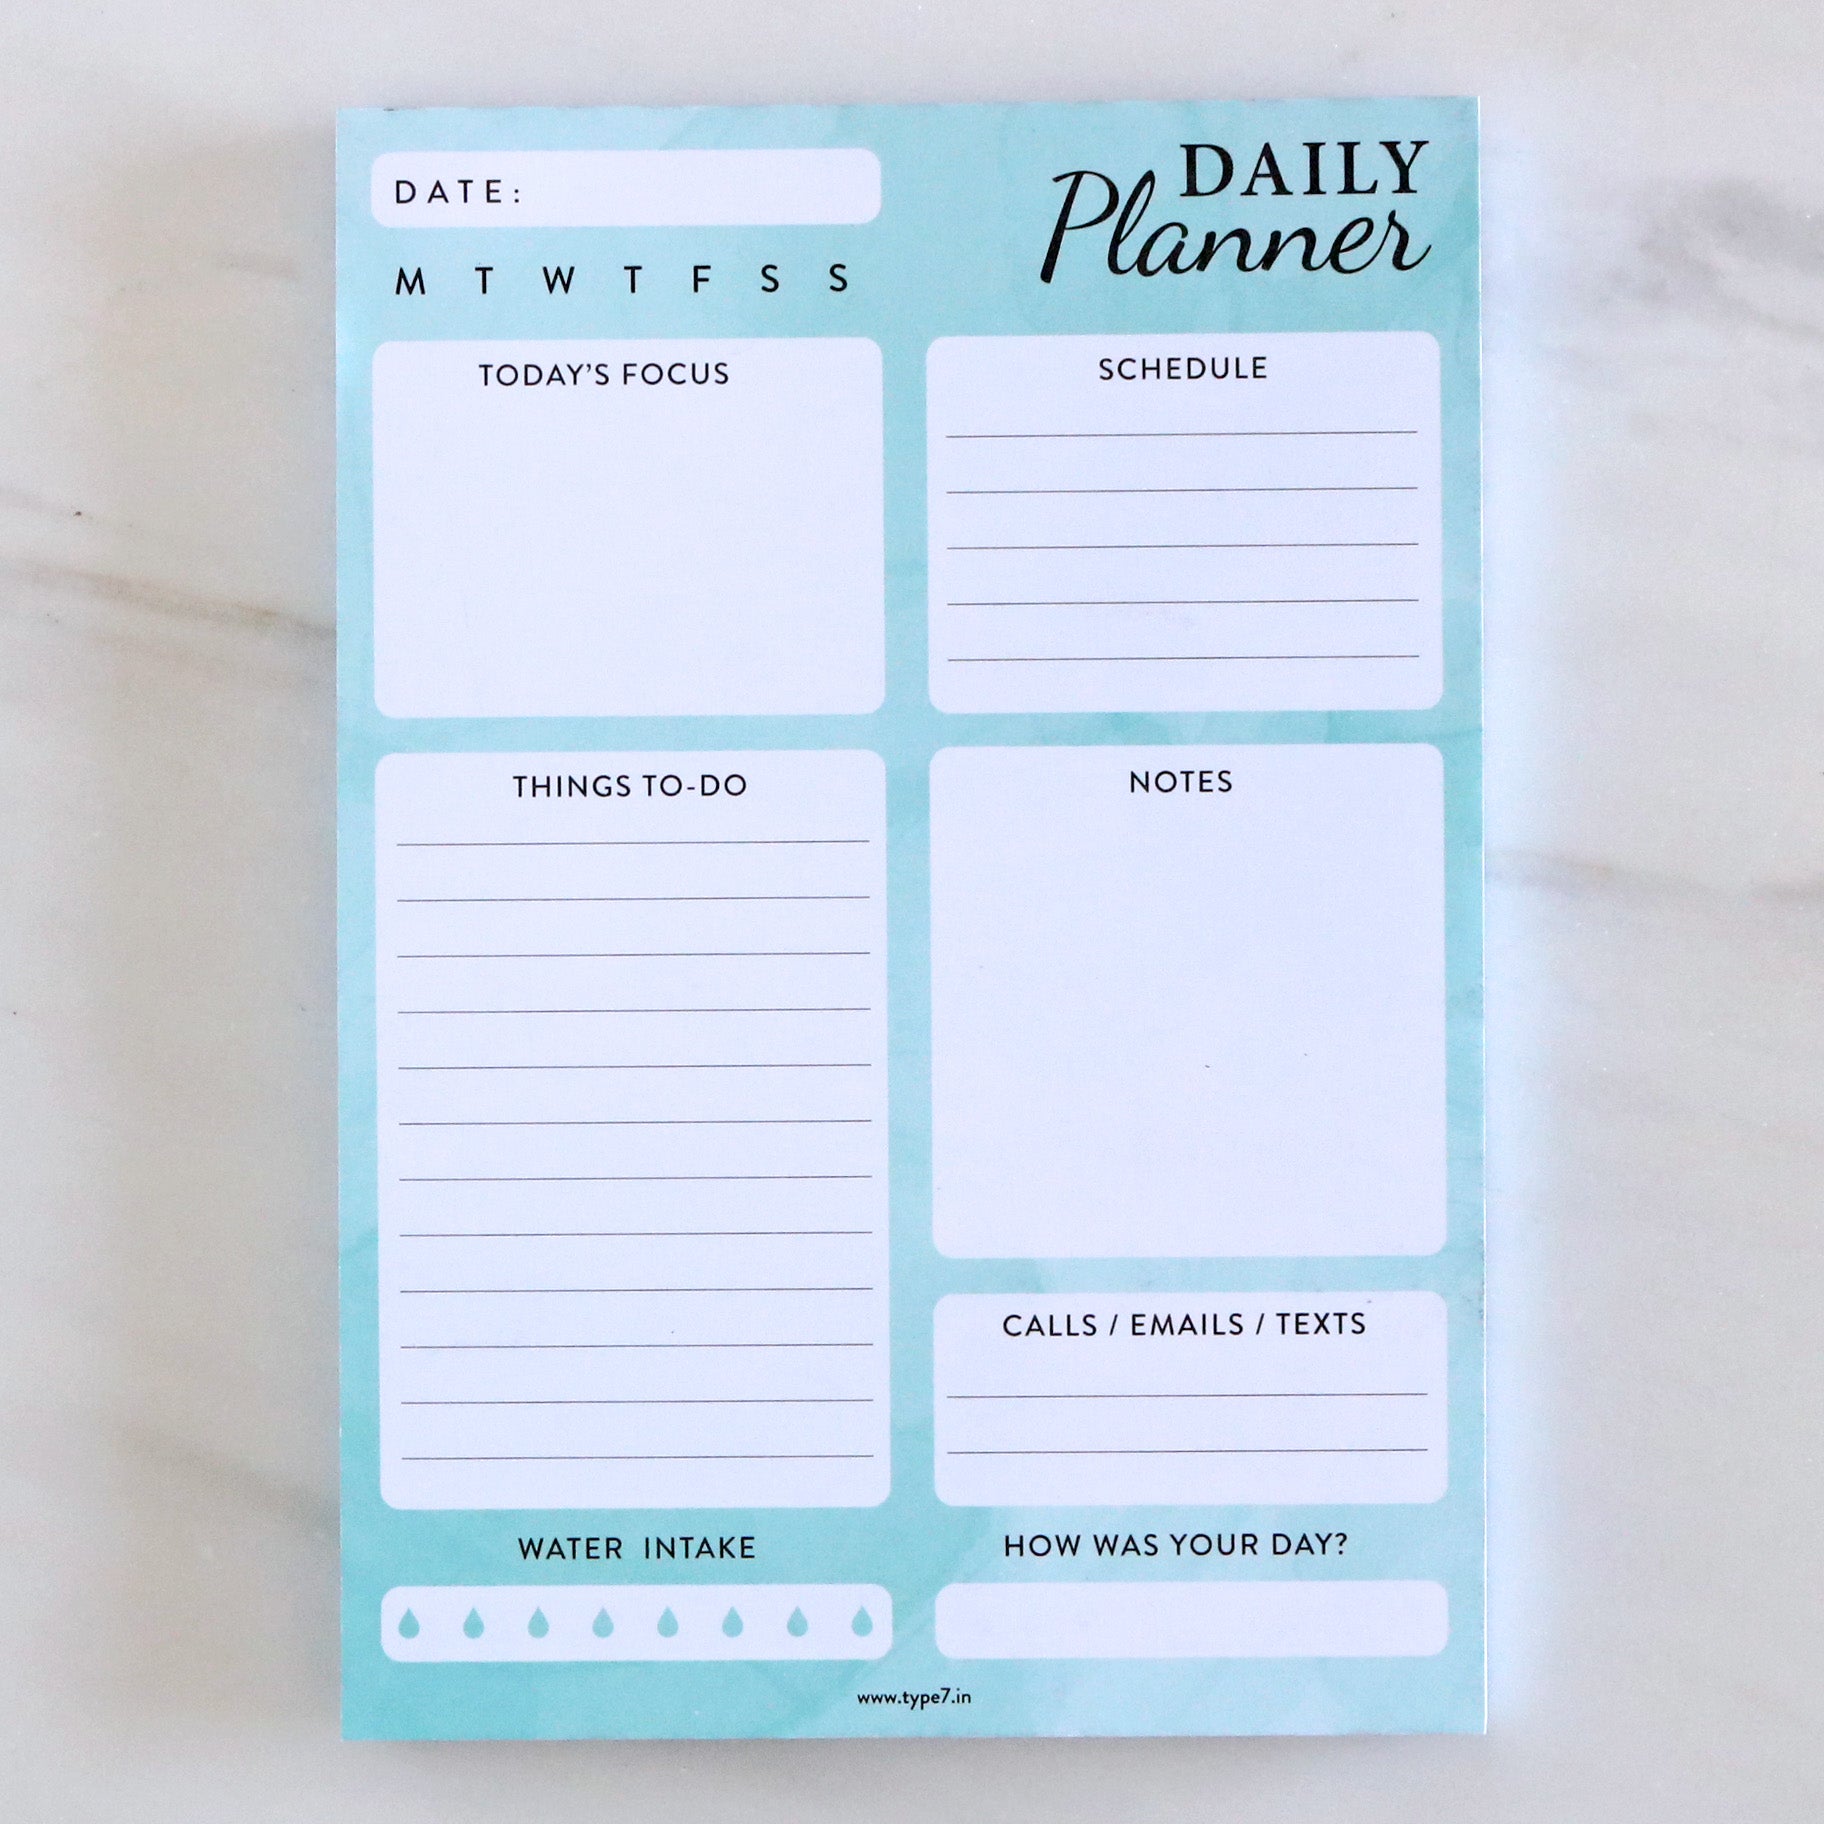 Set of 2 Planner - Plan Your Day Away